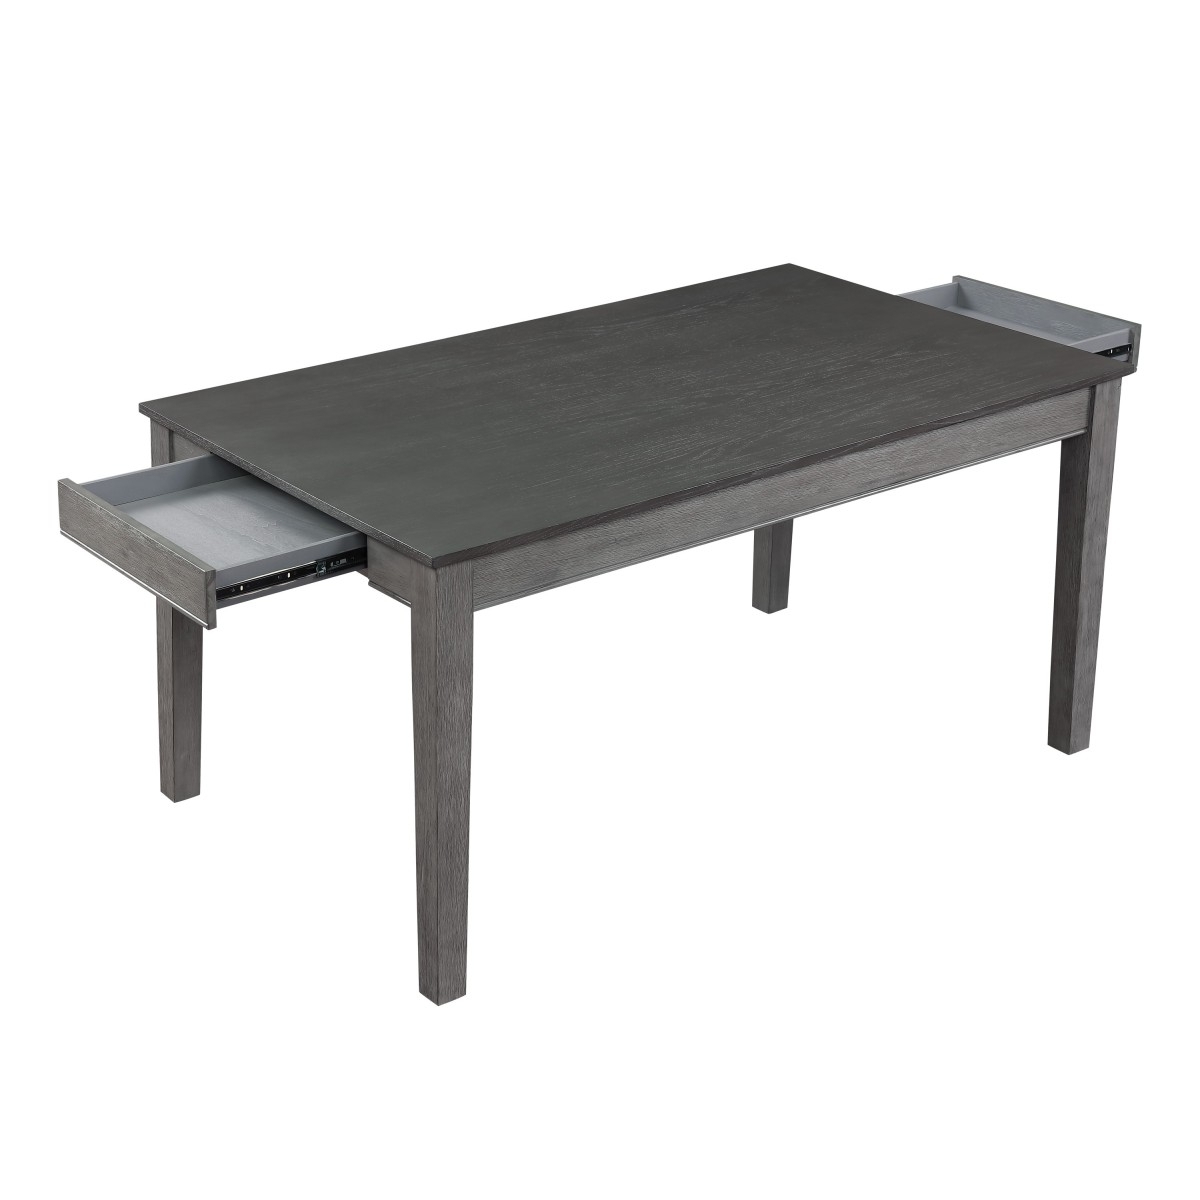 Rectangular Wooden Dining Table With 2 Drawers And Tapered Legs, Gray- Saltoro Sherpi